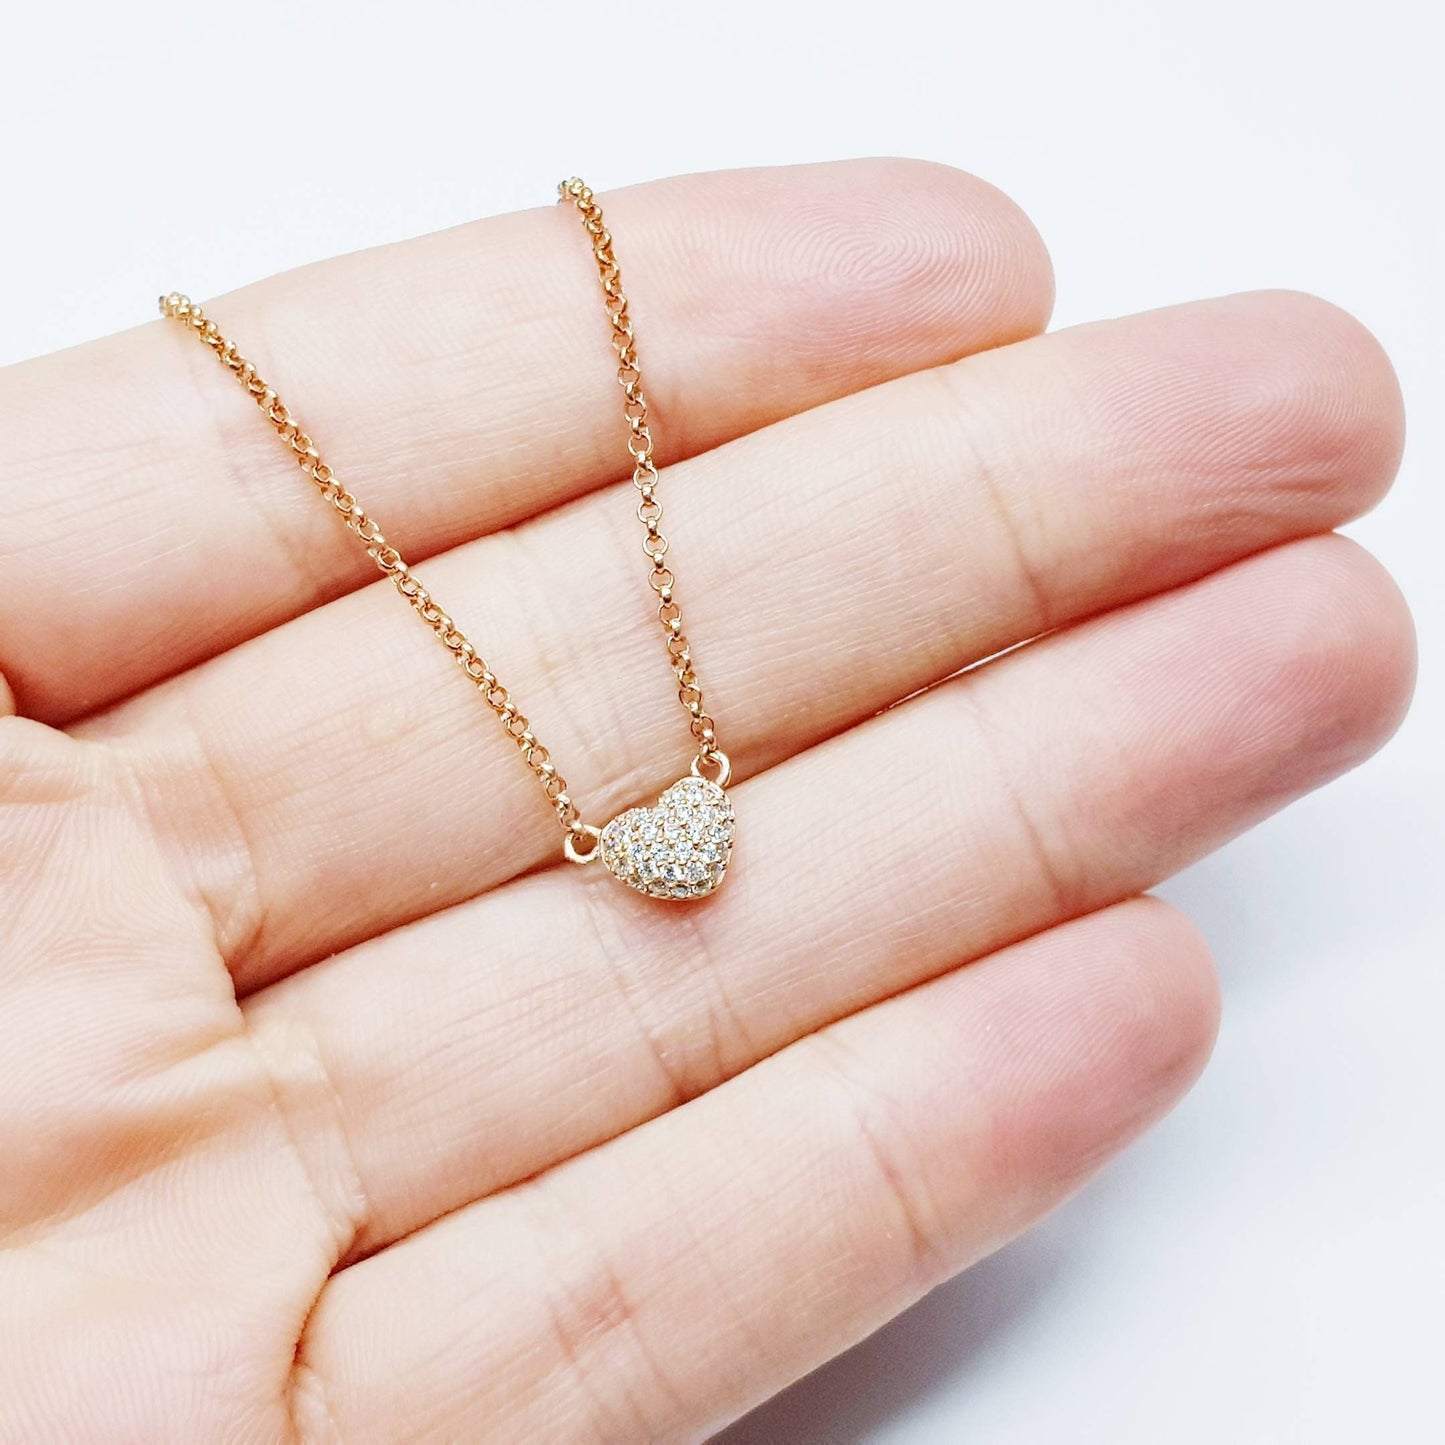 Small heart necklace, rose gold plated sterling silver heart pendant